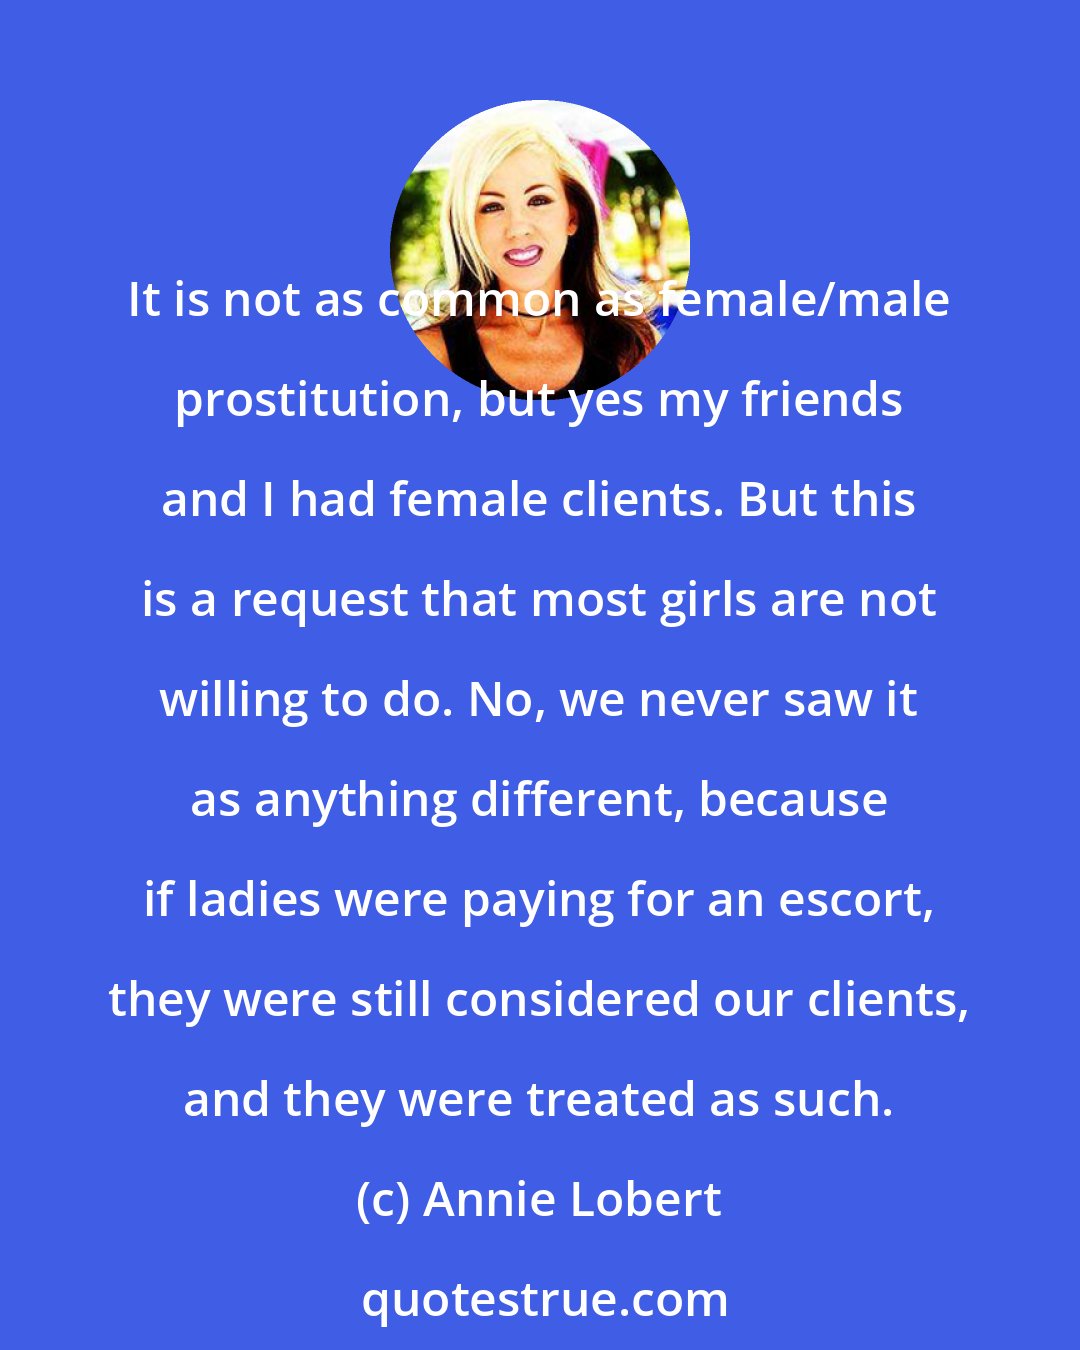 Annie Lobert: It is not as common as female/male prostitution, but yes my friends and I had female clients. But this is a request that most girls are not willing to do. No, we never saw it as anything different, because if ladies were paying for an escort, they were still considered our clients, and they were treated as such.